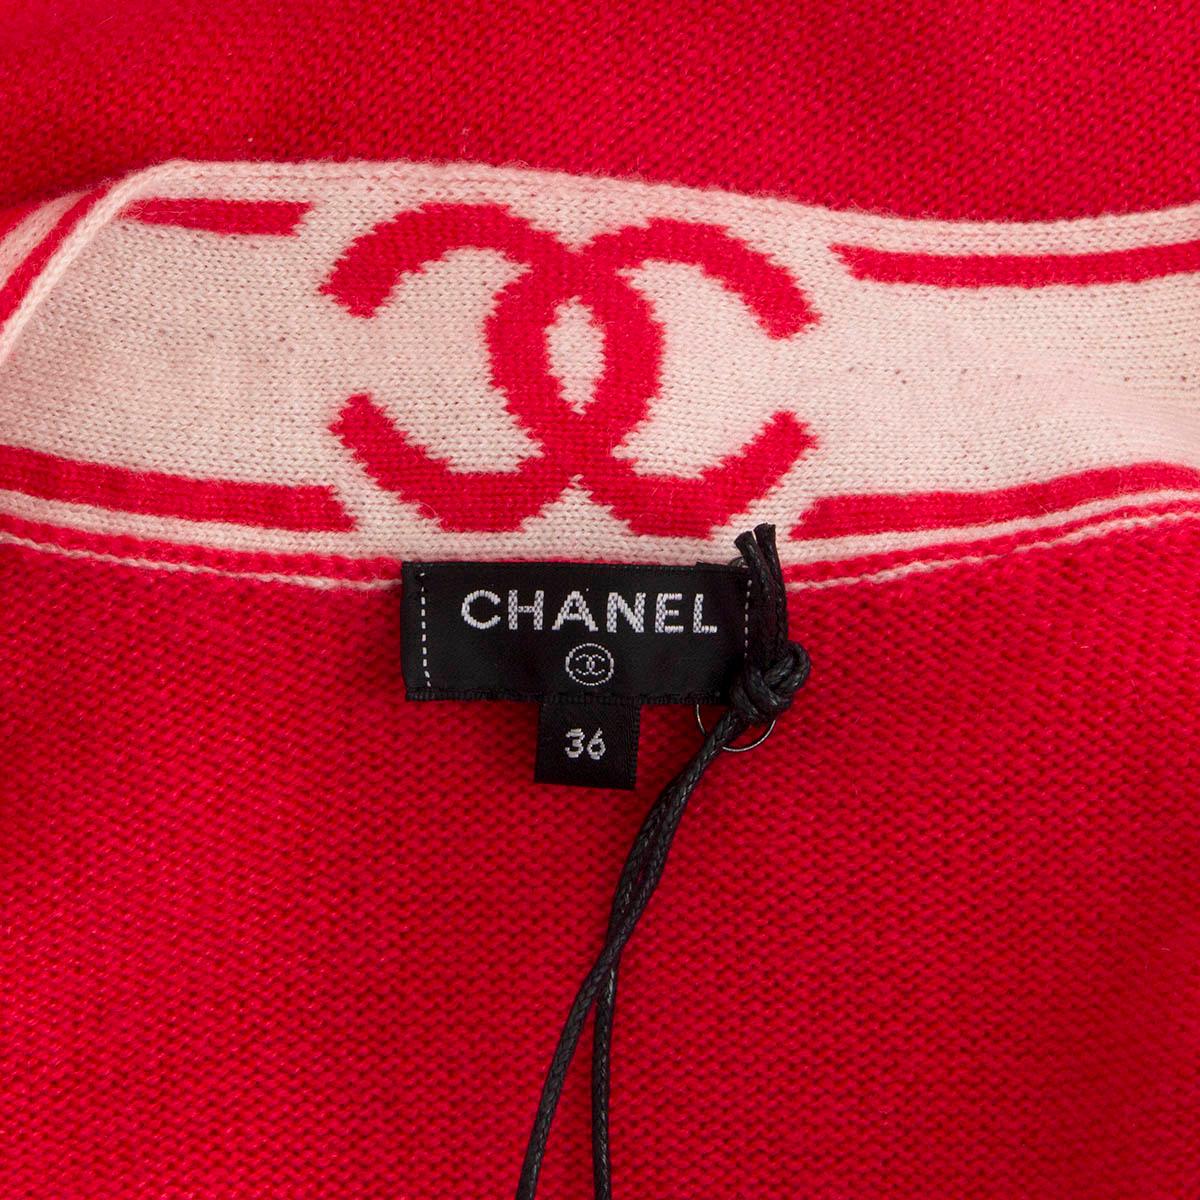 CHANEL pink cashmere 2019 19P LOGO MAXI Cardigan Sweater 36 XS For Sale 1